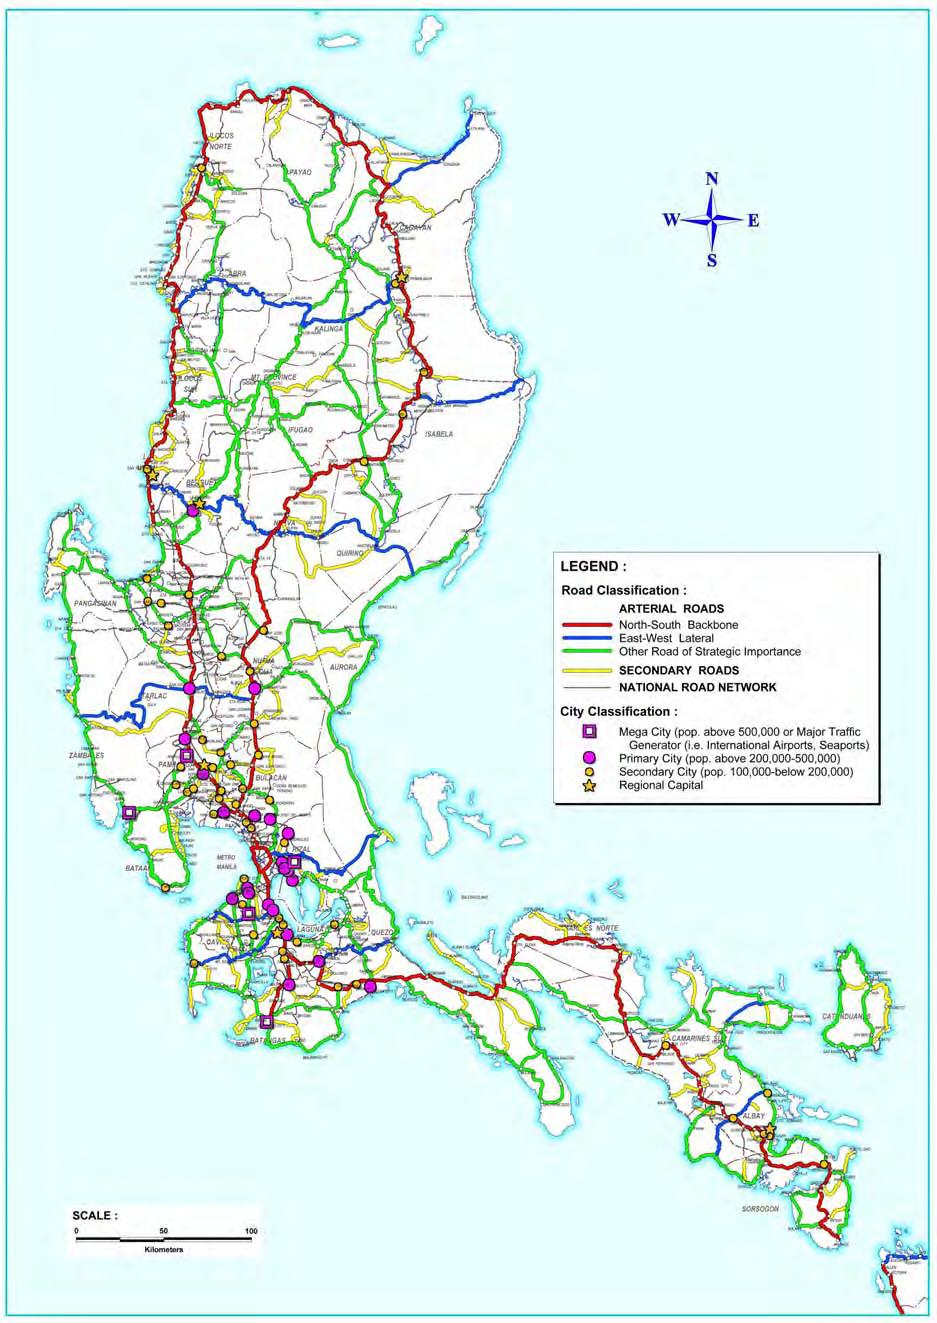 Source: Prepared by the Study Team based on DPWH data and NSCB data.